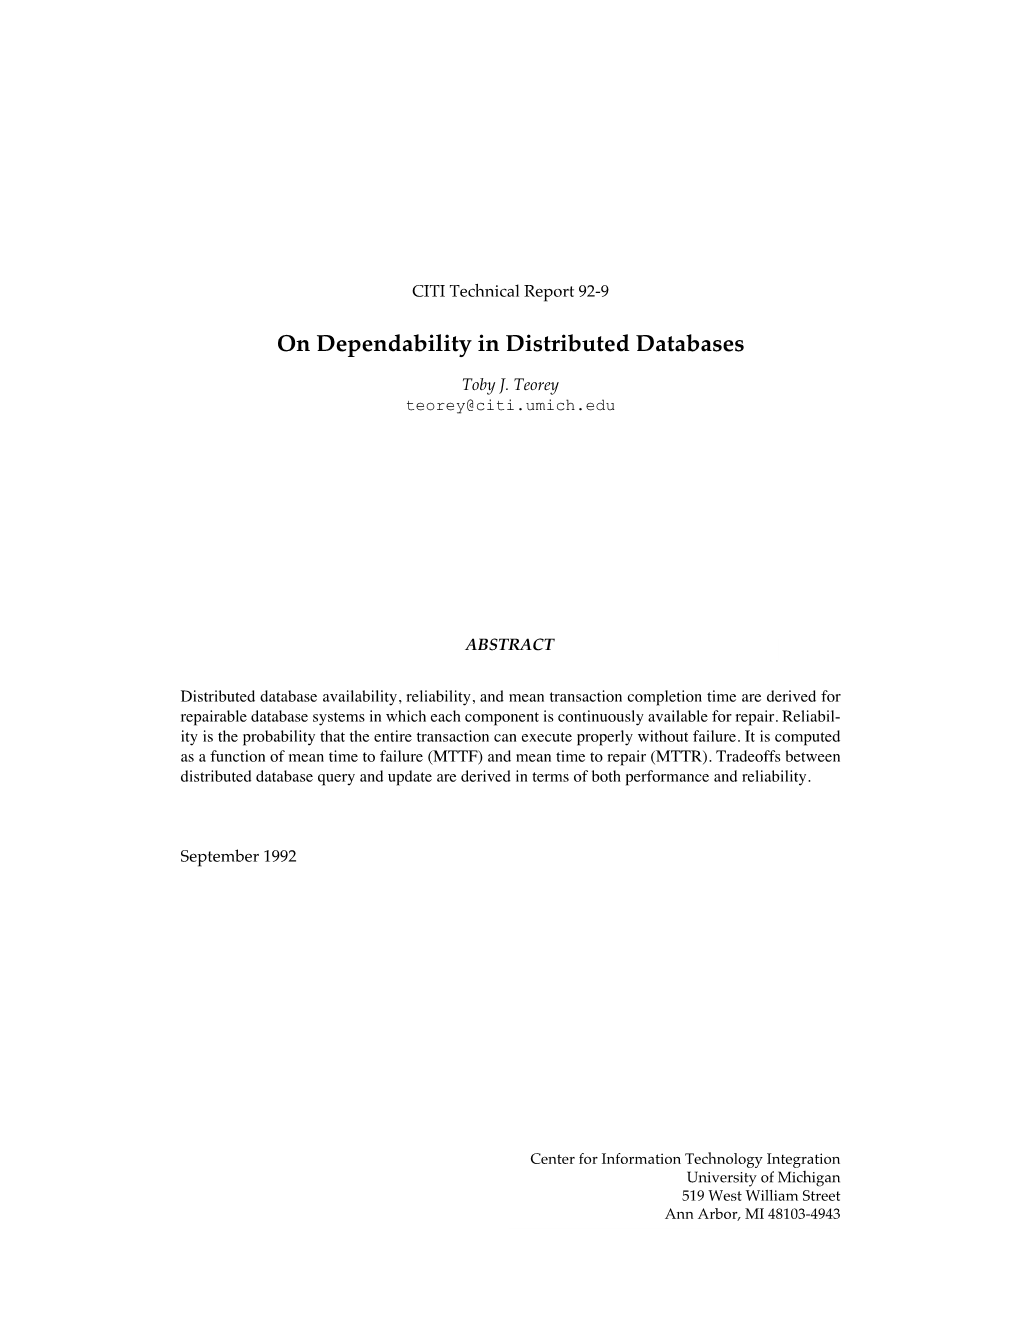 On Dependability in Distributed Databases